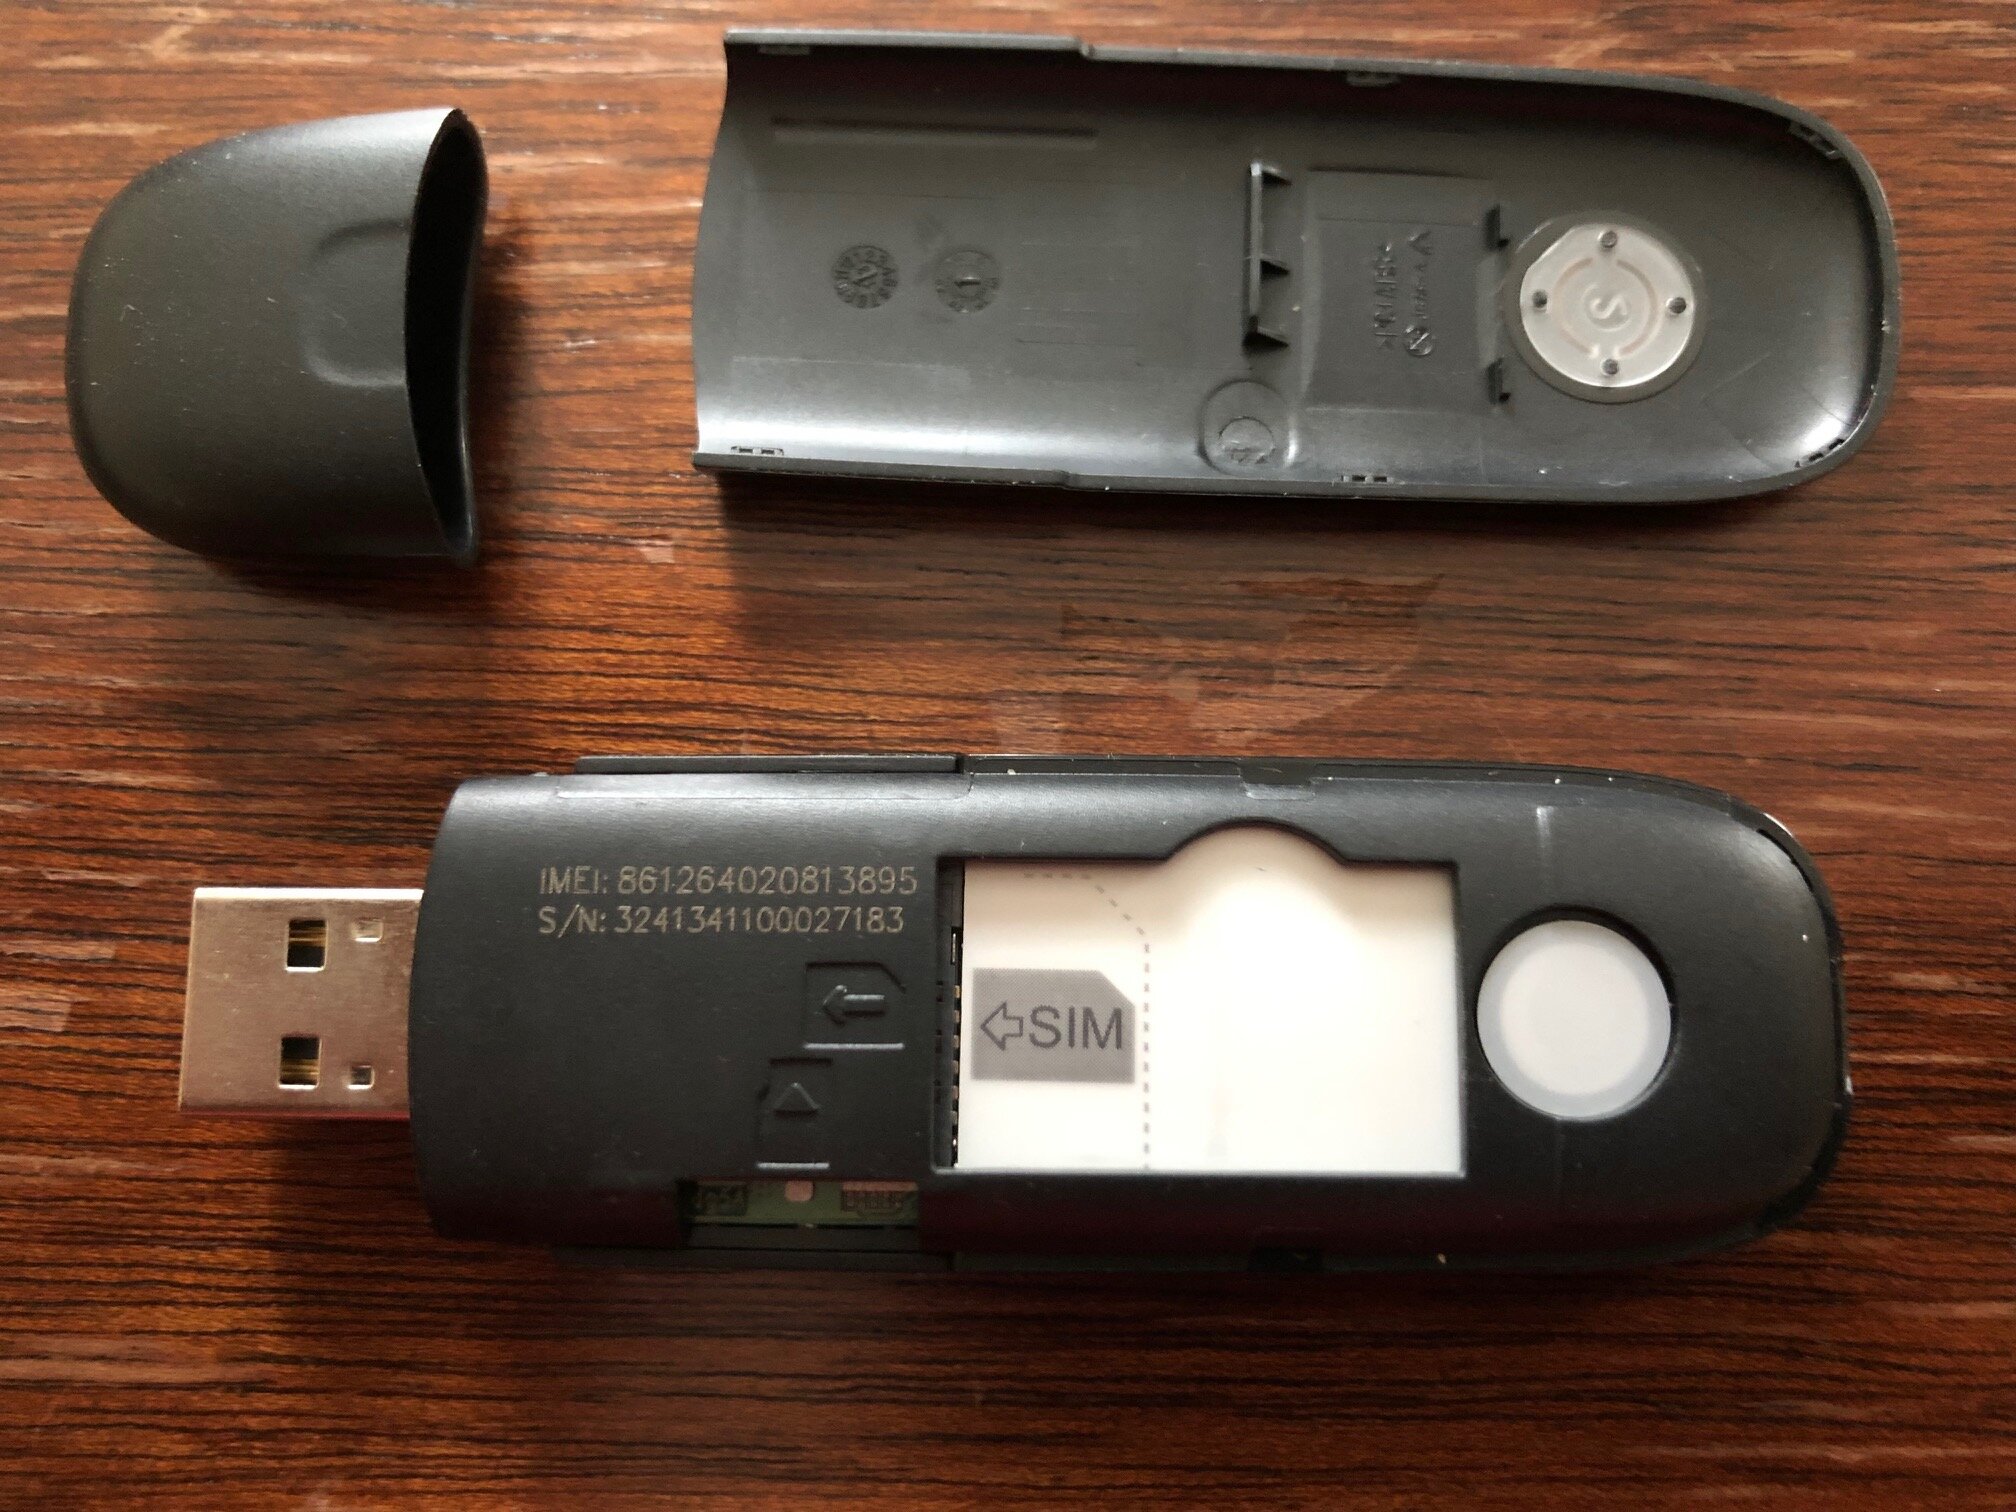 Setting SMS Sending and Receiving using USB Dongle by ZTE — Selective Intellect